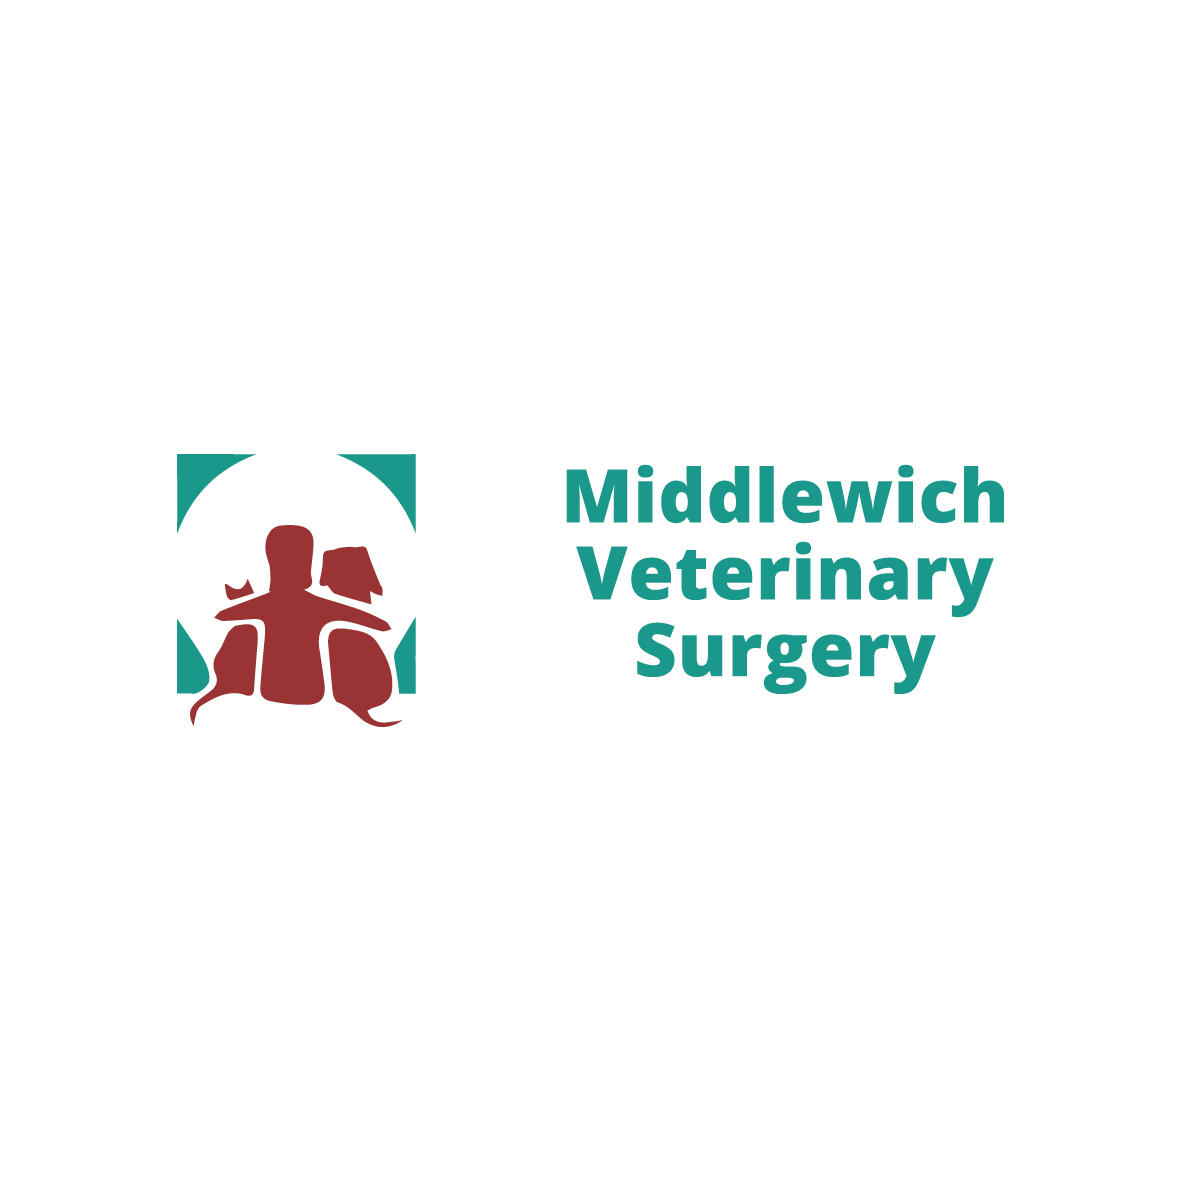 Willows Veterinary Group - Middlewich Veterinary Surgery - Middlewich, Cheshire CW10 9HL - 01606 833731 | ShowMeLocal.com